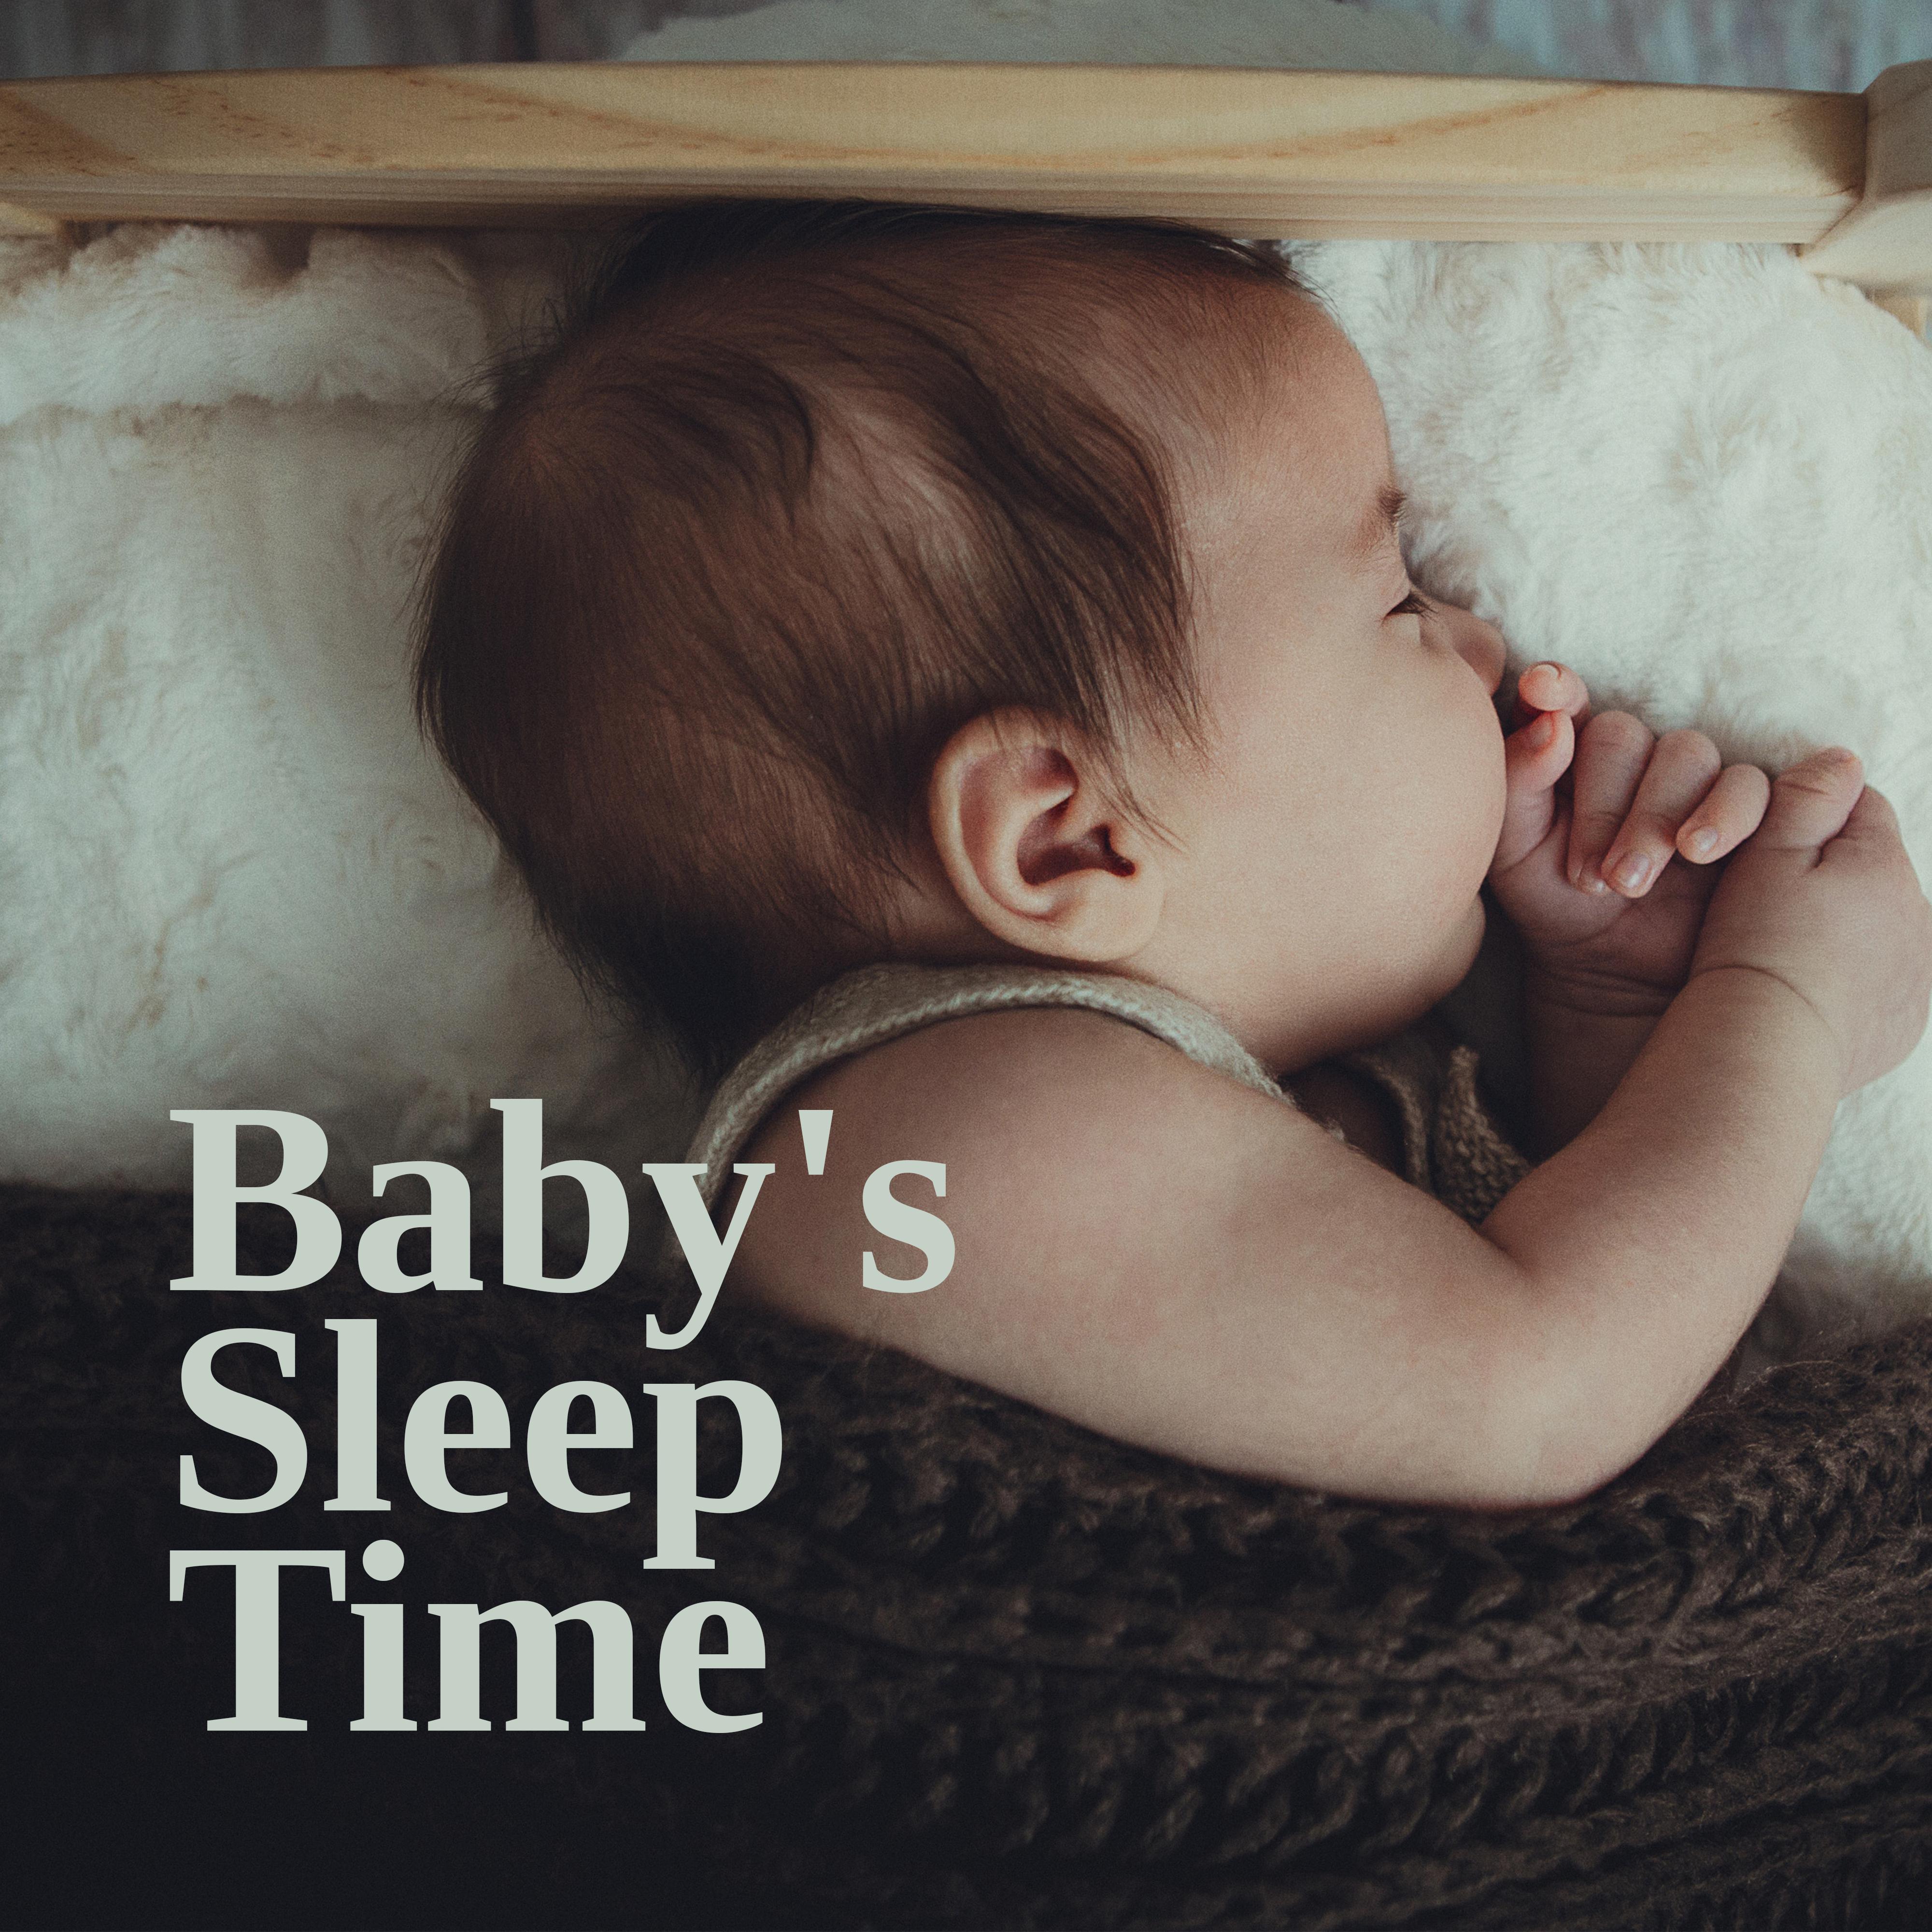 Baby's Sleep Time: New Age Soft Music for Better Sleep, Baby Calming Down & Relaxing